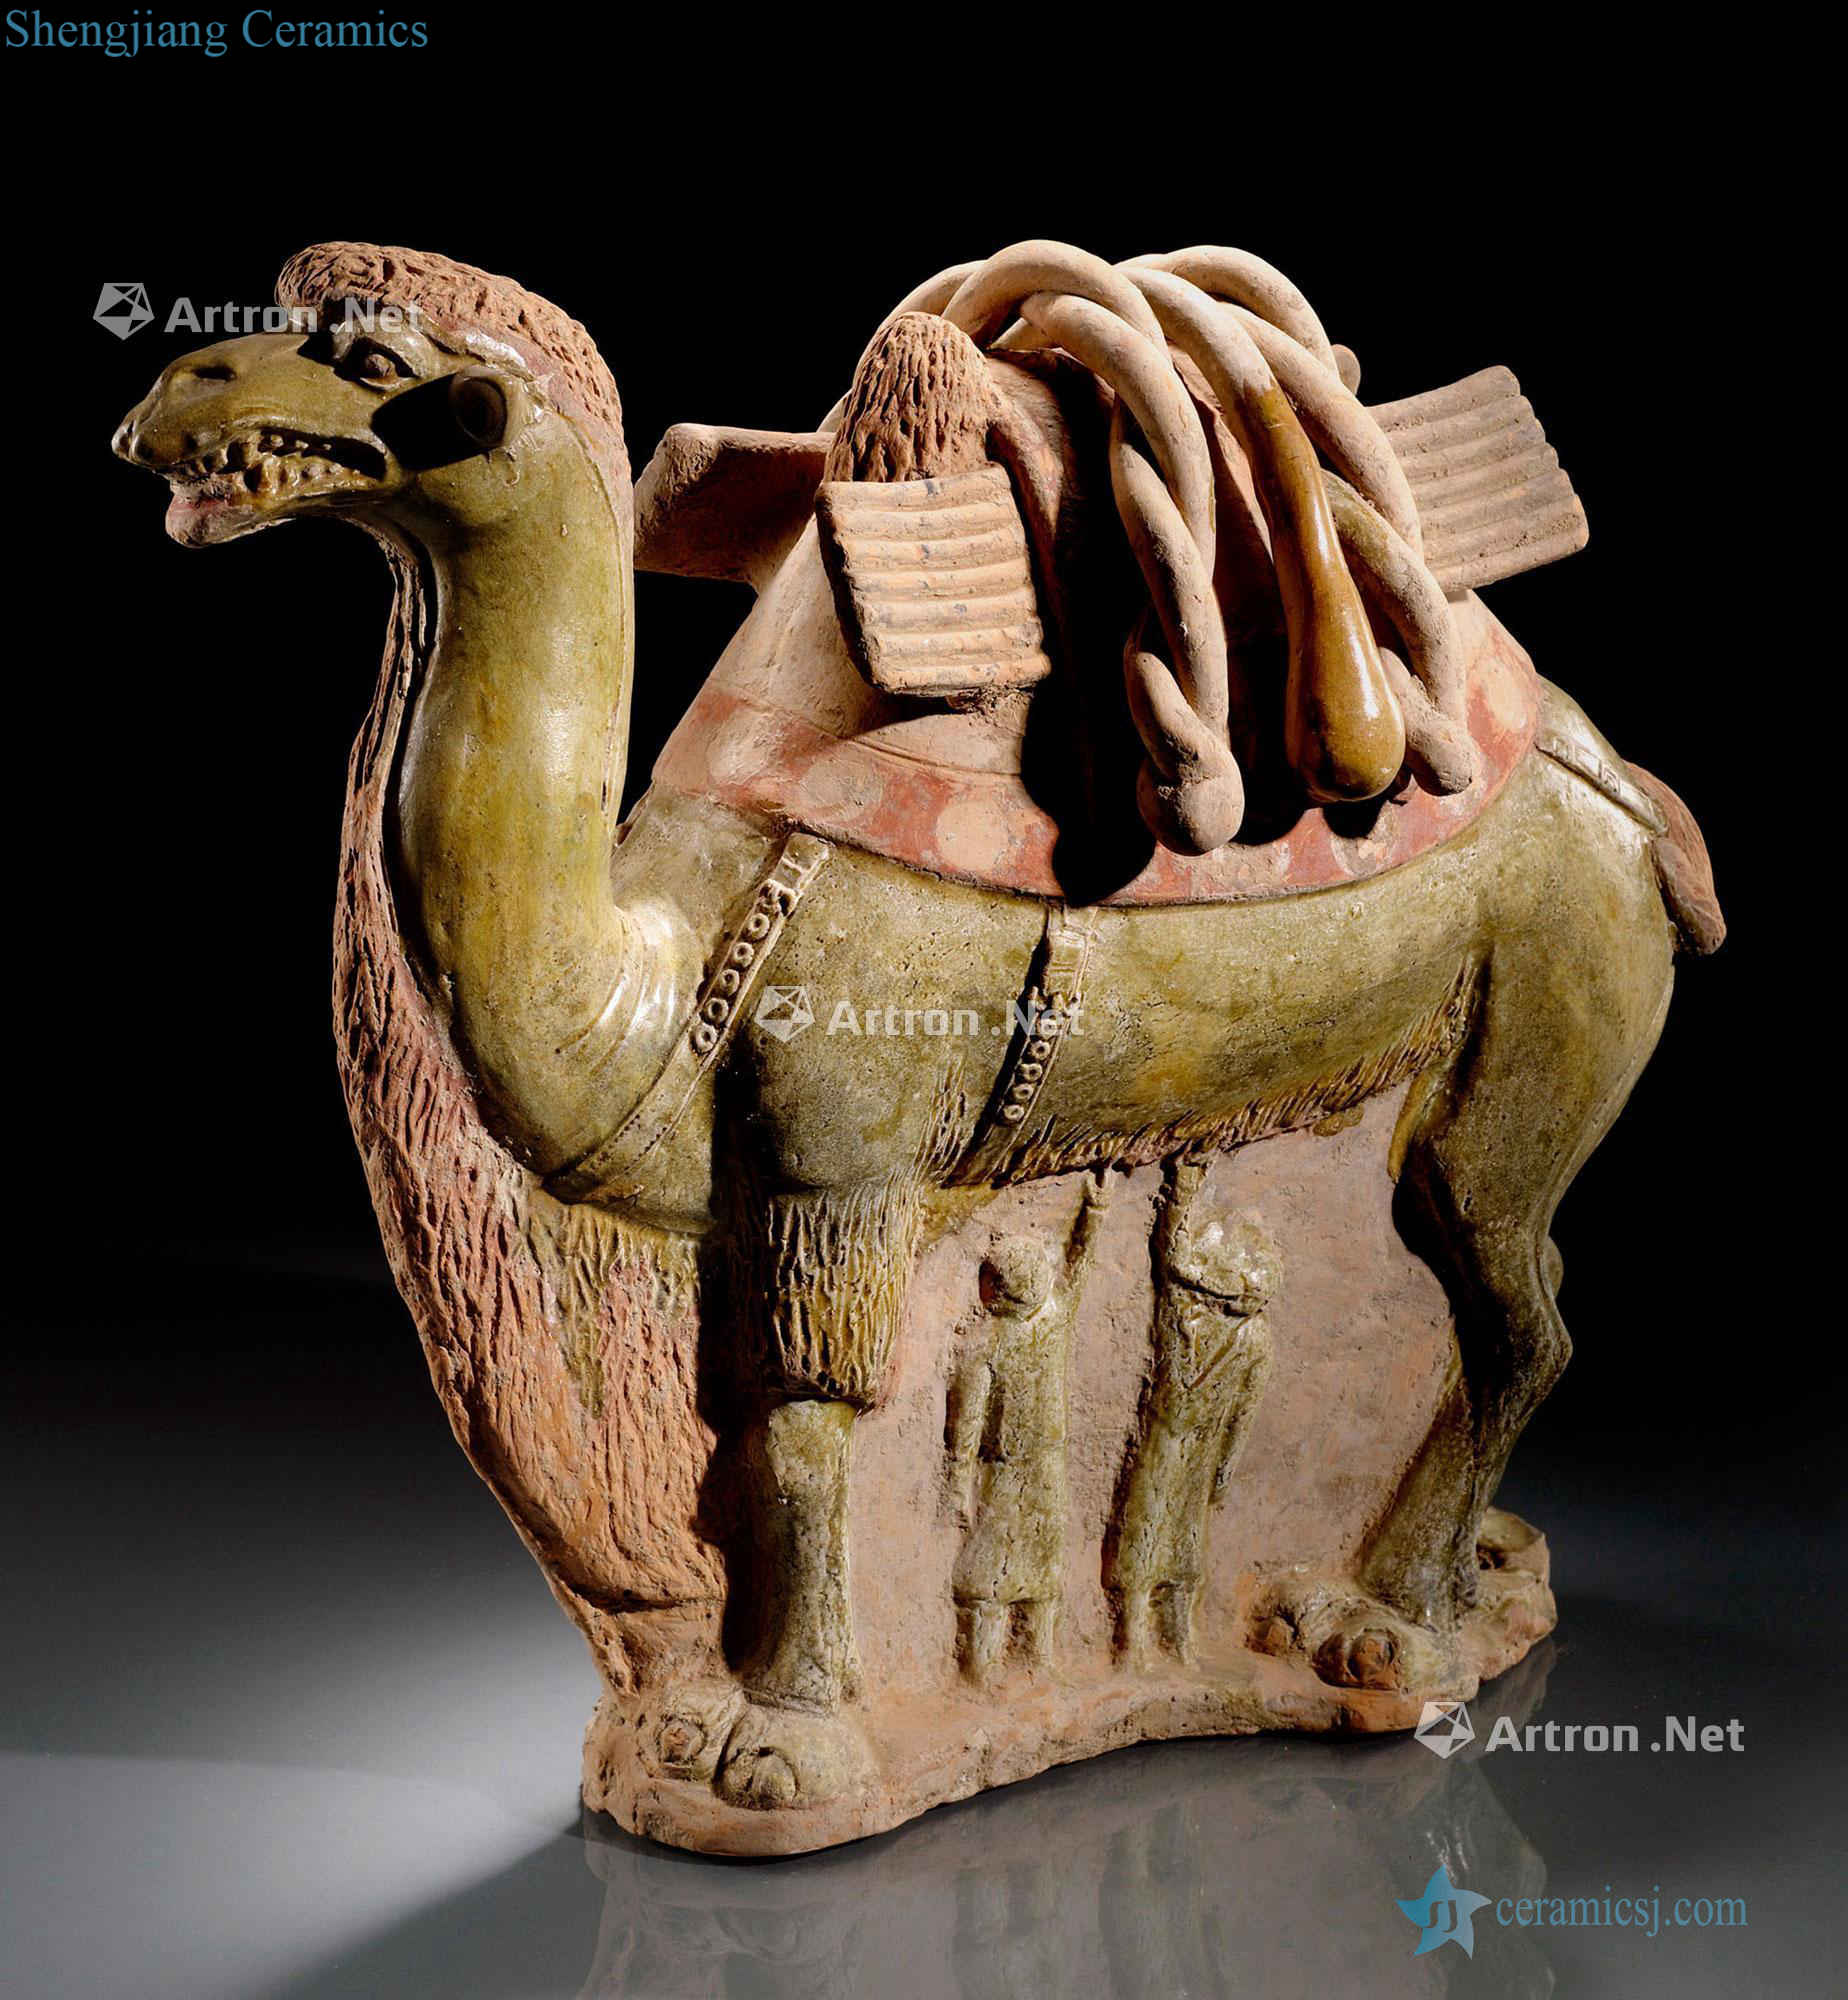 The 7th century, sui dynasty/the tang dynasty, the camel figurines